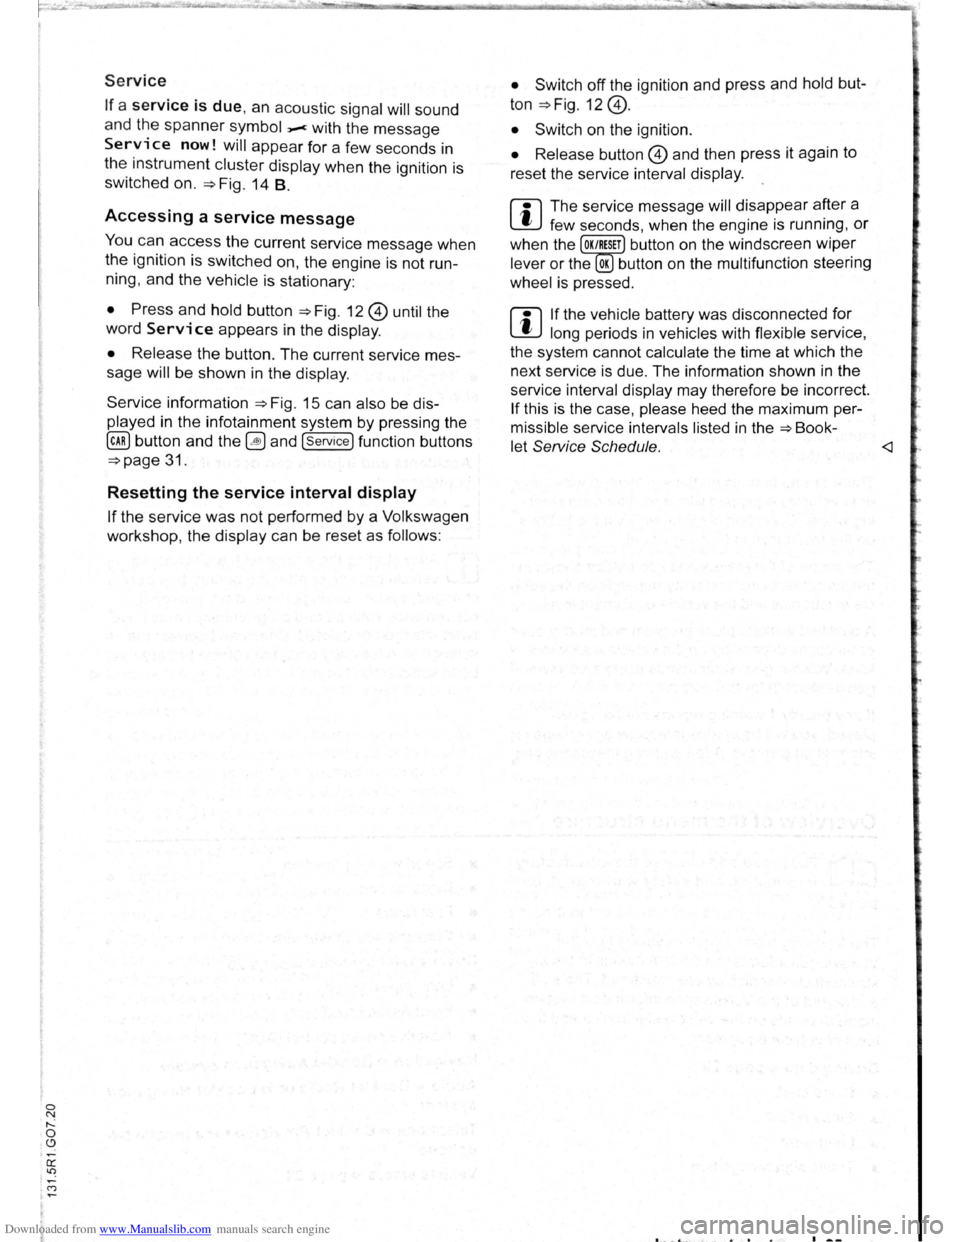 VOLKSWAGEN BEETLE 2009  Owners Manual Downloaded from www.Manualslib.com manuals search engine 0 N ,....: 0 .C) 
Service 
If a service is due, an acoustic signal will sound 
and the spanner symbol _.c with the message 
Service now! will a